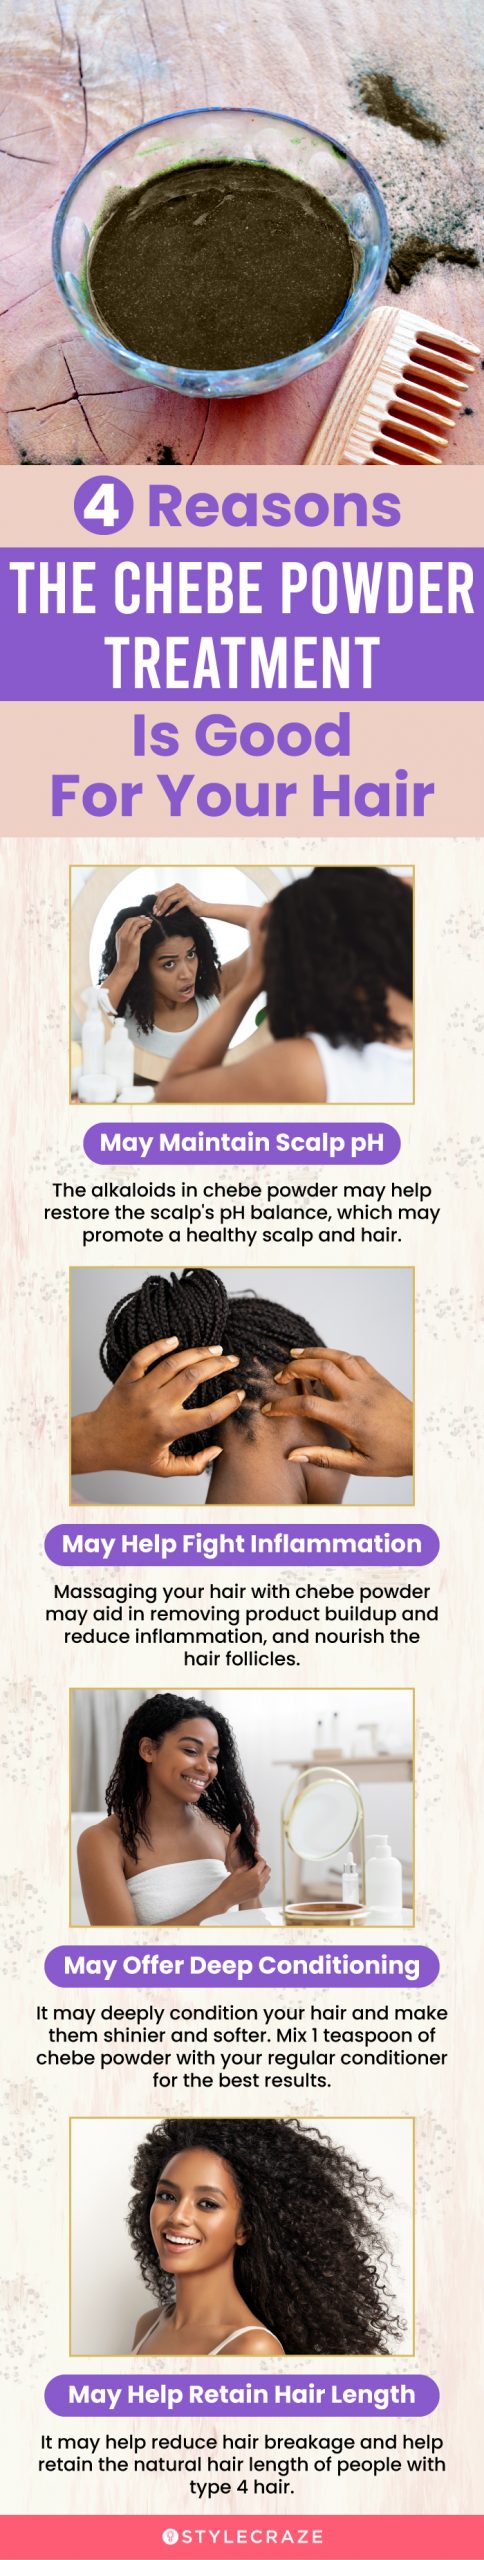 4 reasons the chebe powder treatment is good for your hair (infographic)